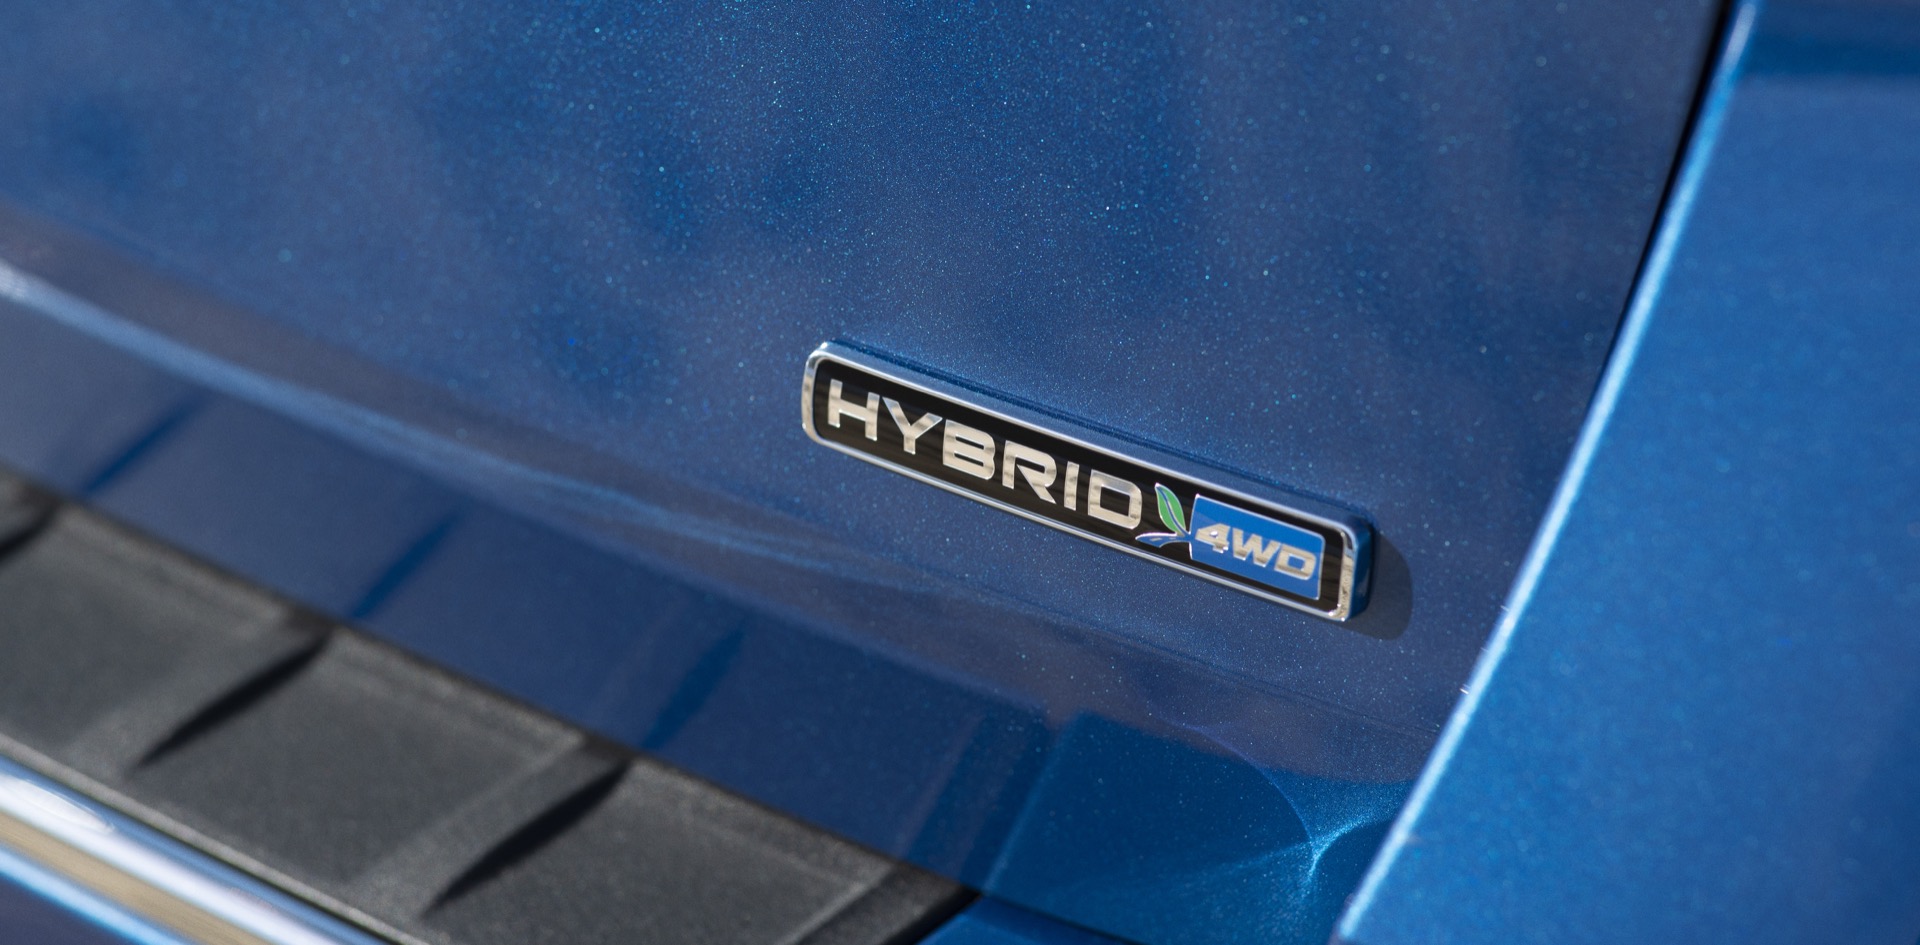 Ford CEO: Hybrids will play “increasingly important role” alongside EVs